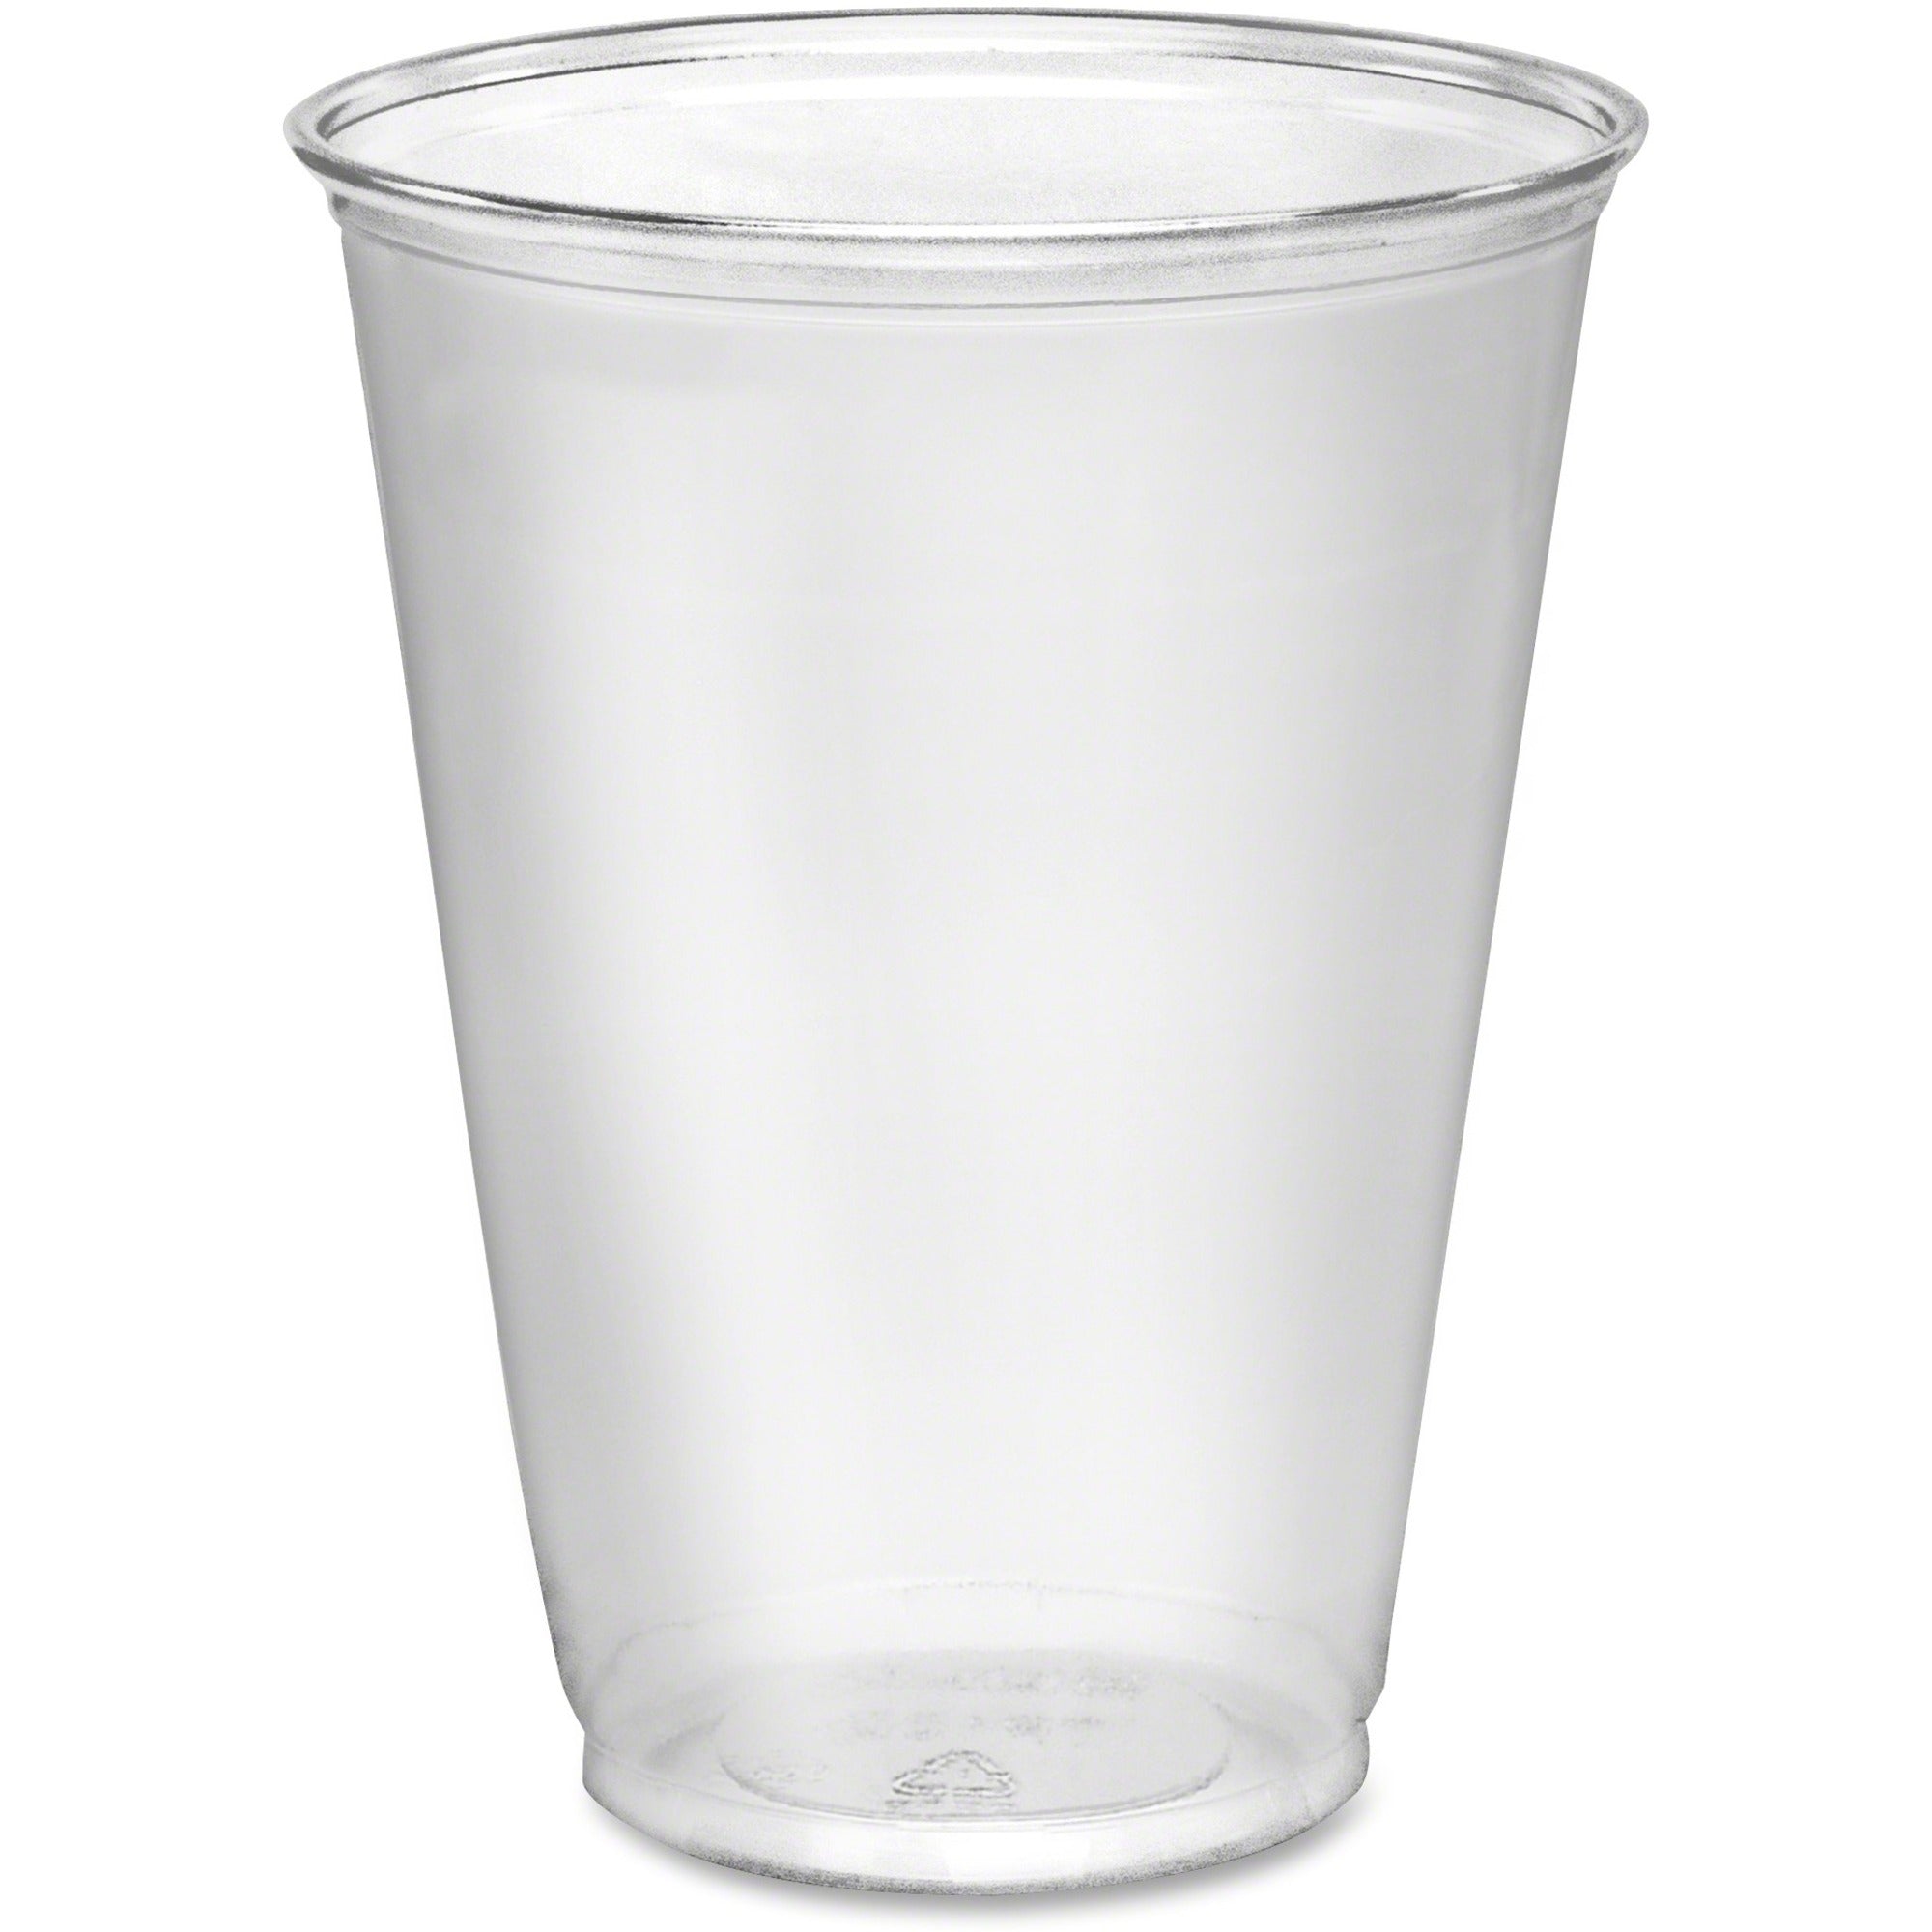 solo-ultra-clear-10-oz-cold-cups-500-pack-20-carton-clear-plastic-polyethylene-terephthalate-pet-water-soda-juice-beverage-cold-drink_scctp10d - 1